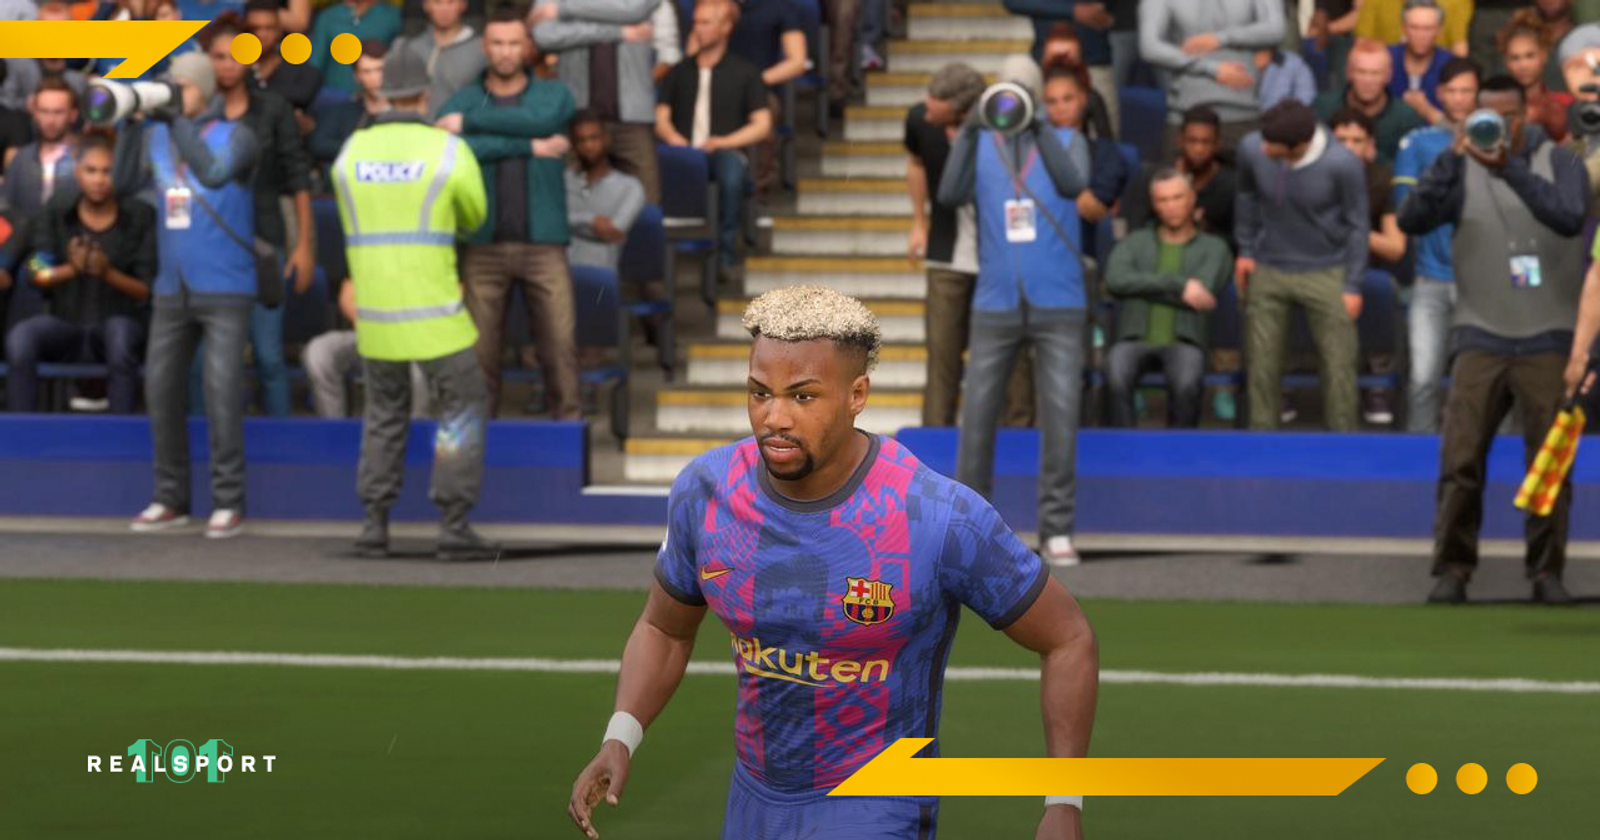 FIFA 23 - Can PS4 and PS5 users play together?